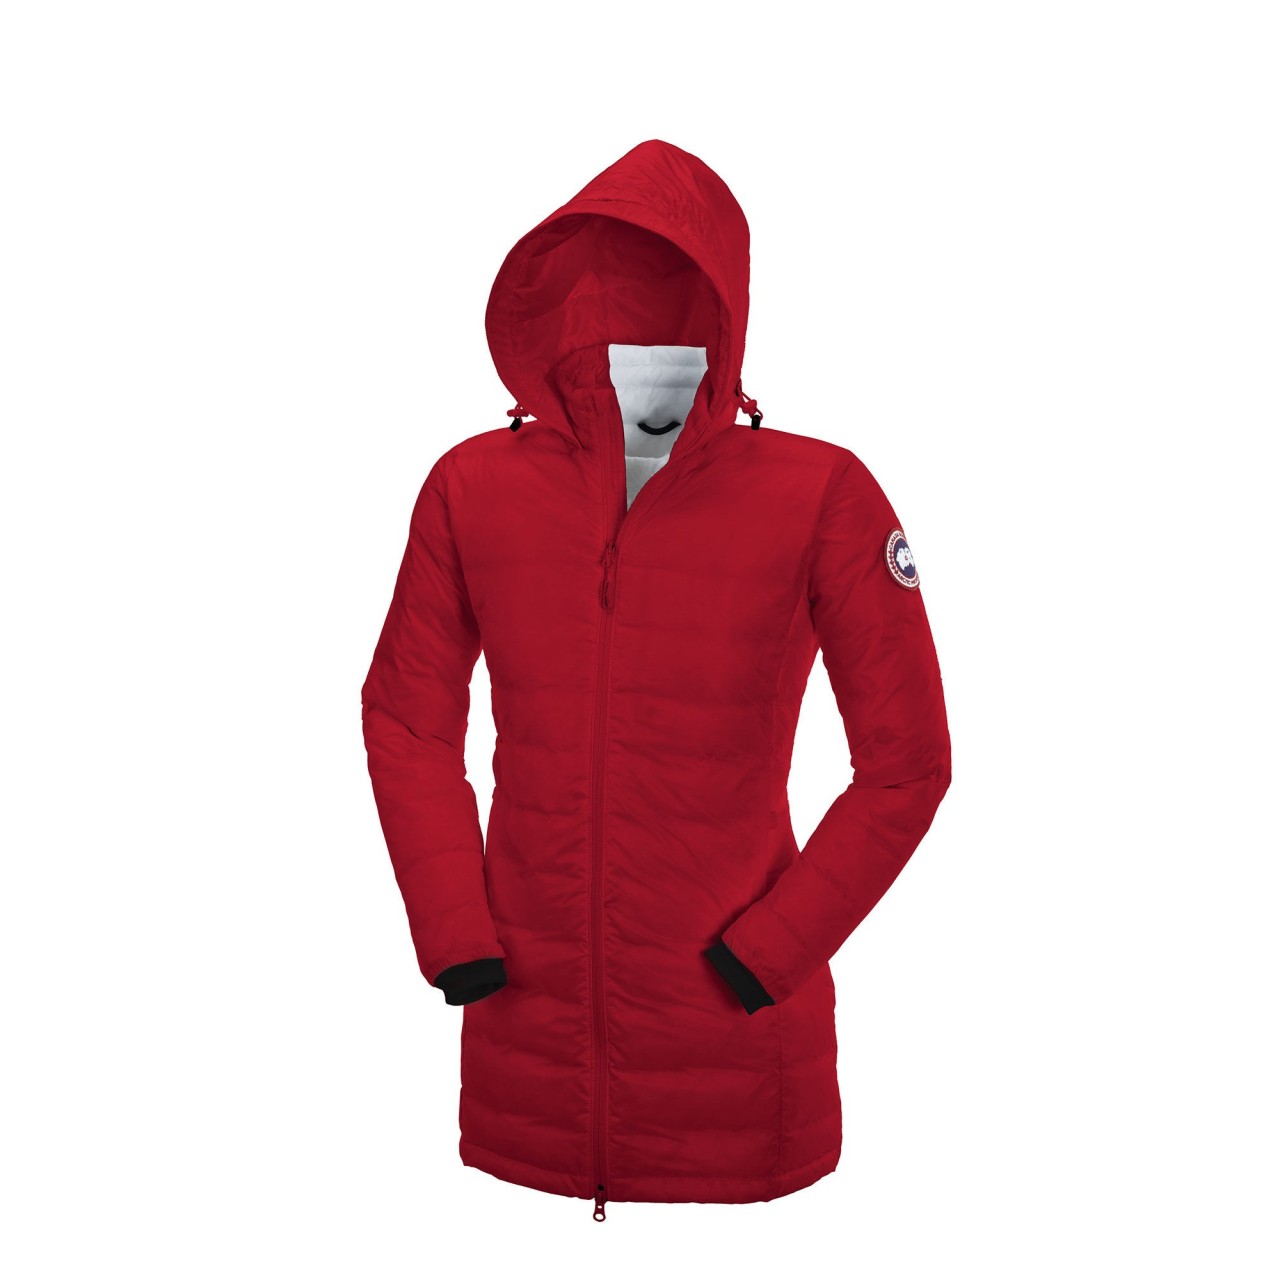 Canada Goose parka online discounts - 70% Off Cheap Canada Goose Jackets Sale